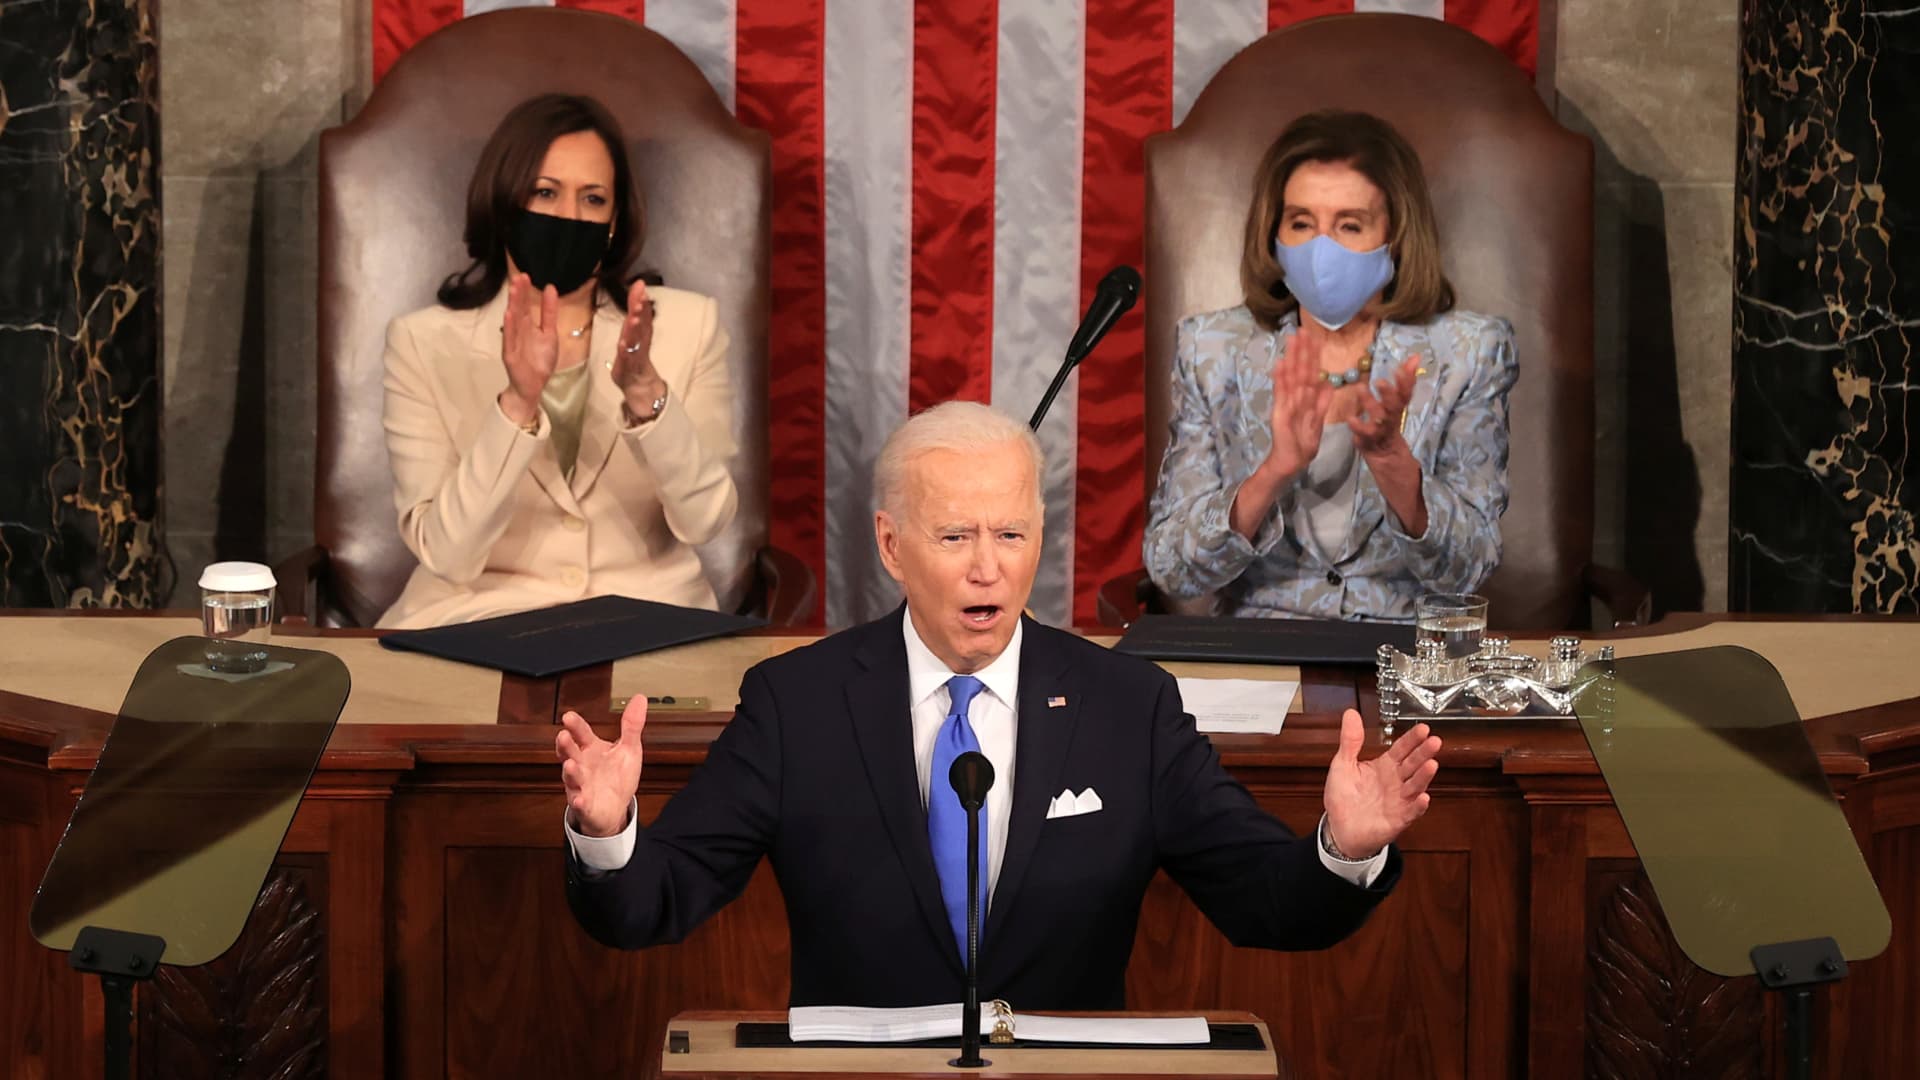 President Joe Biden addresses a joint session of Congress as President Kamala Harris and Speaker of the House U.S. Rep. Nancy Pelosi (D-CA) aplause at the U.S. Capitol in Washington, DC, U.S. April 28, 2021.